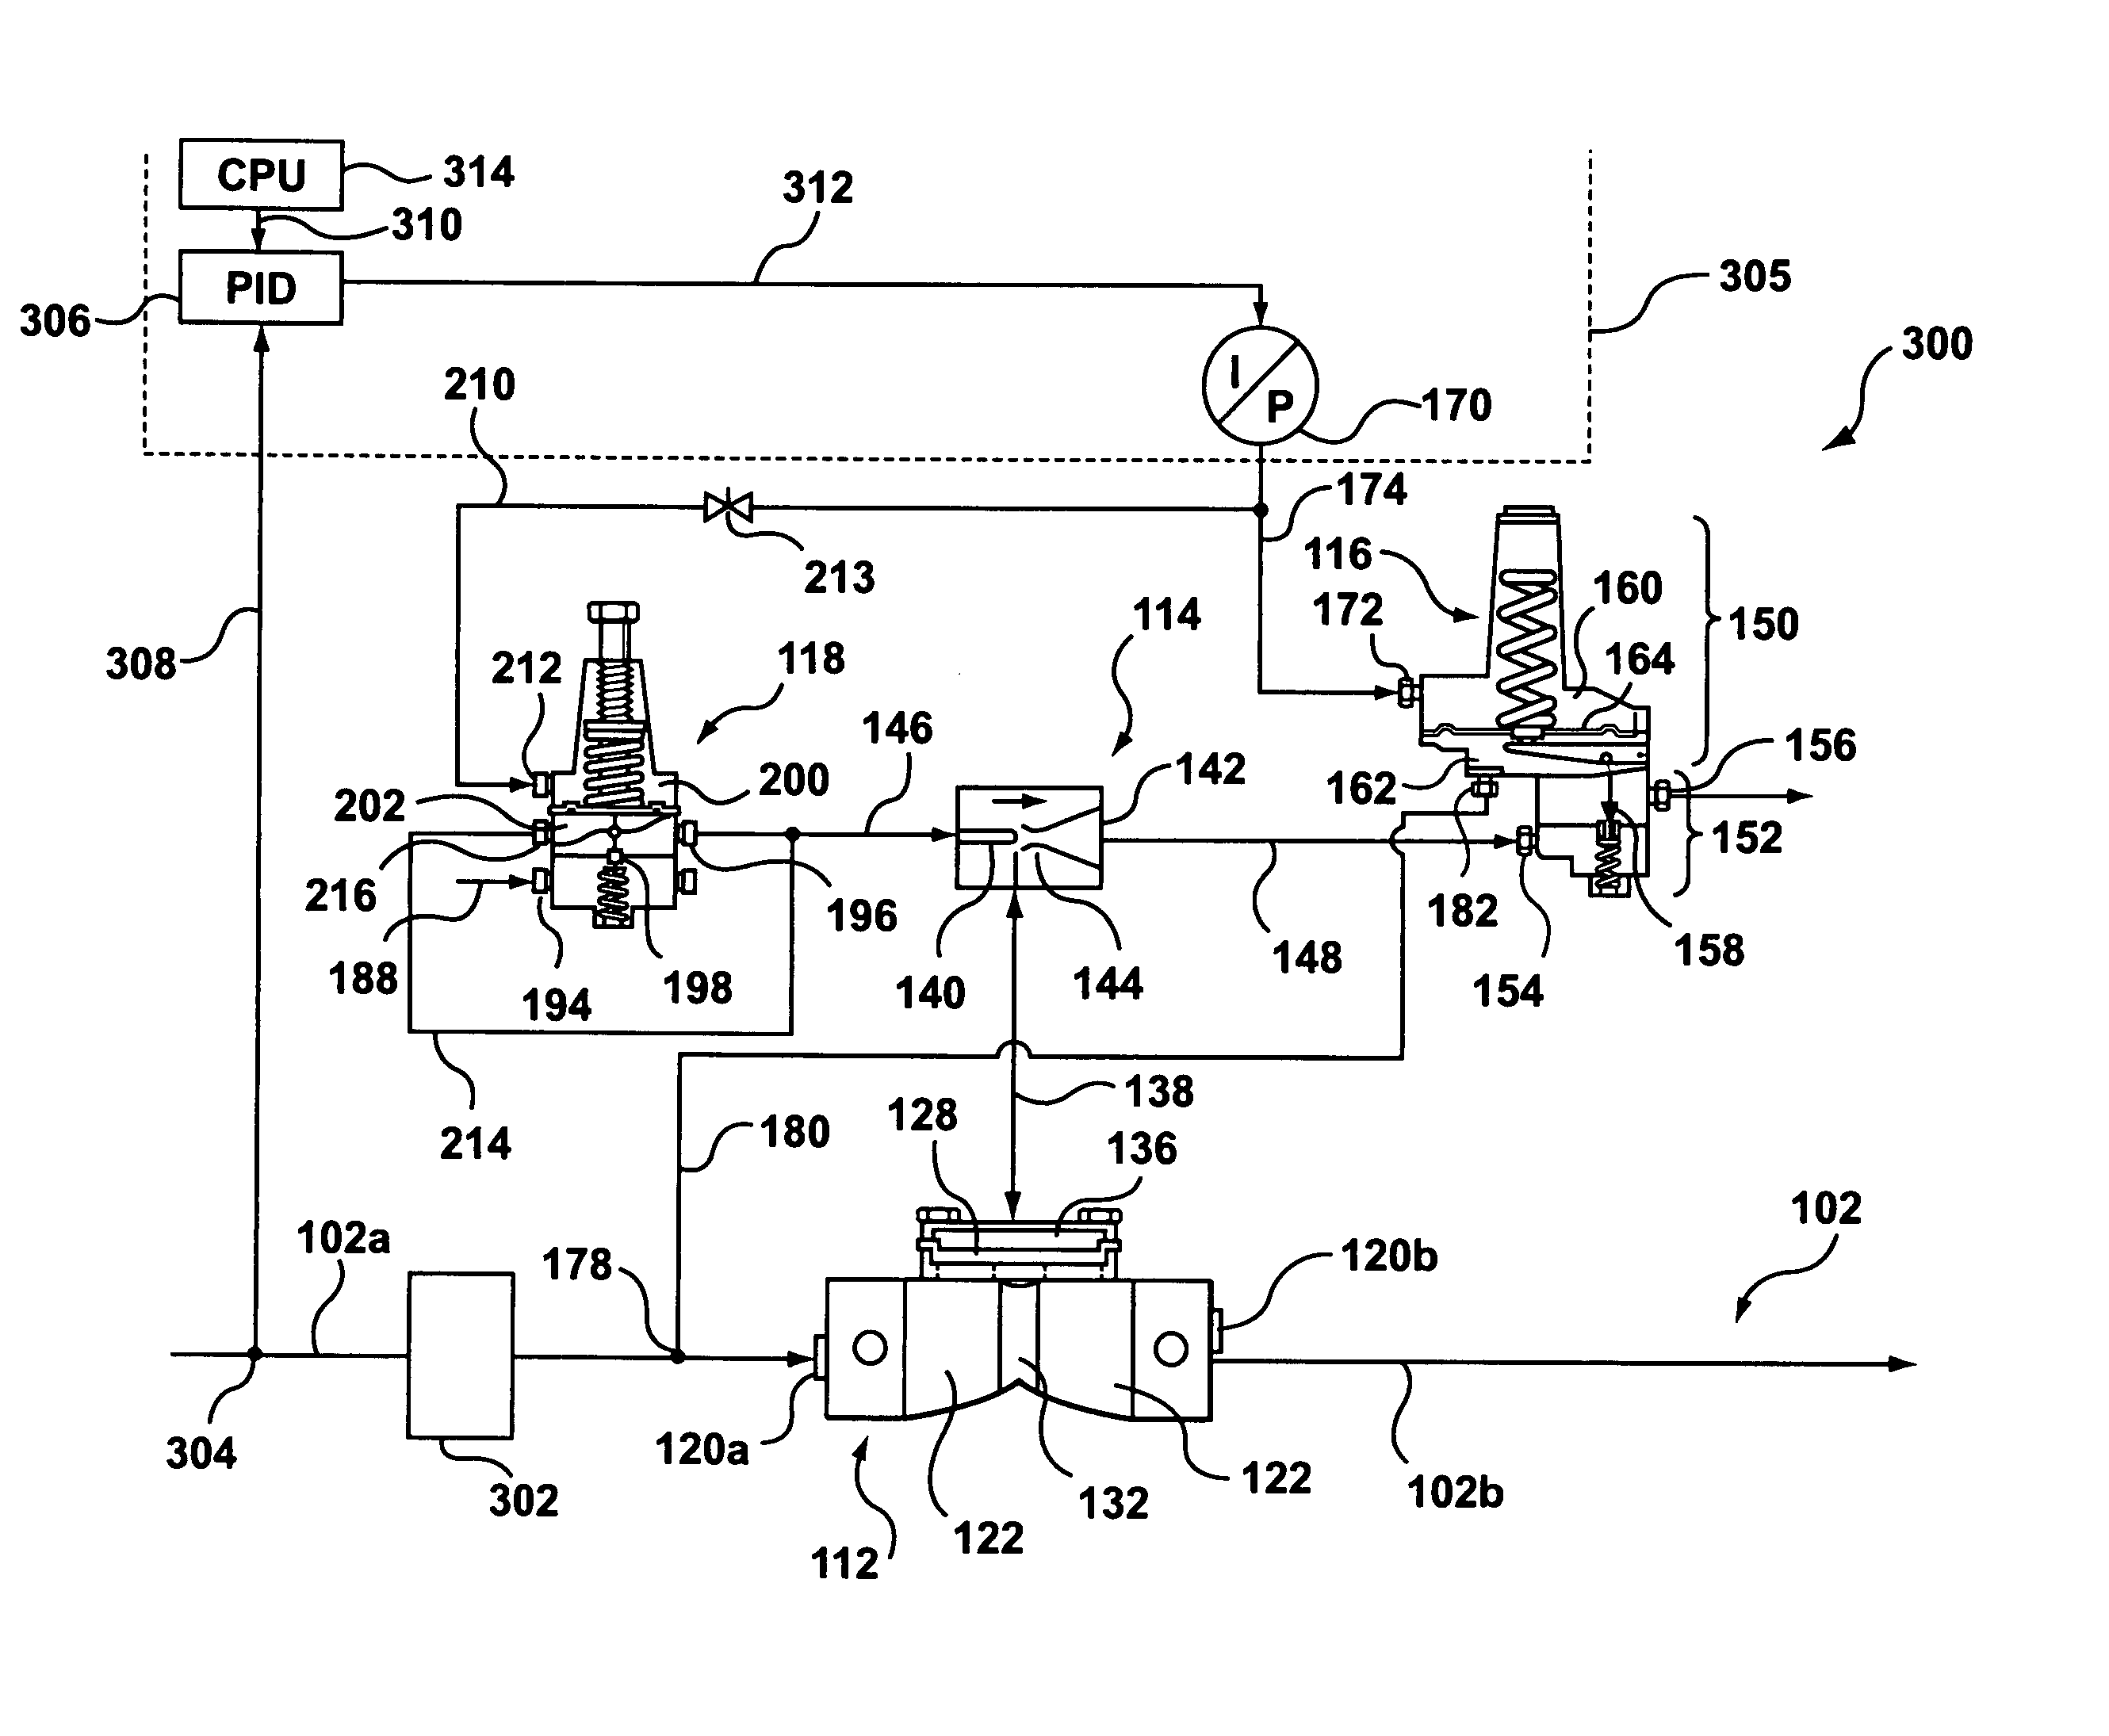 Pressure control system for low pressure high flow operation